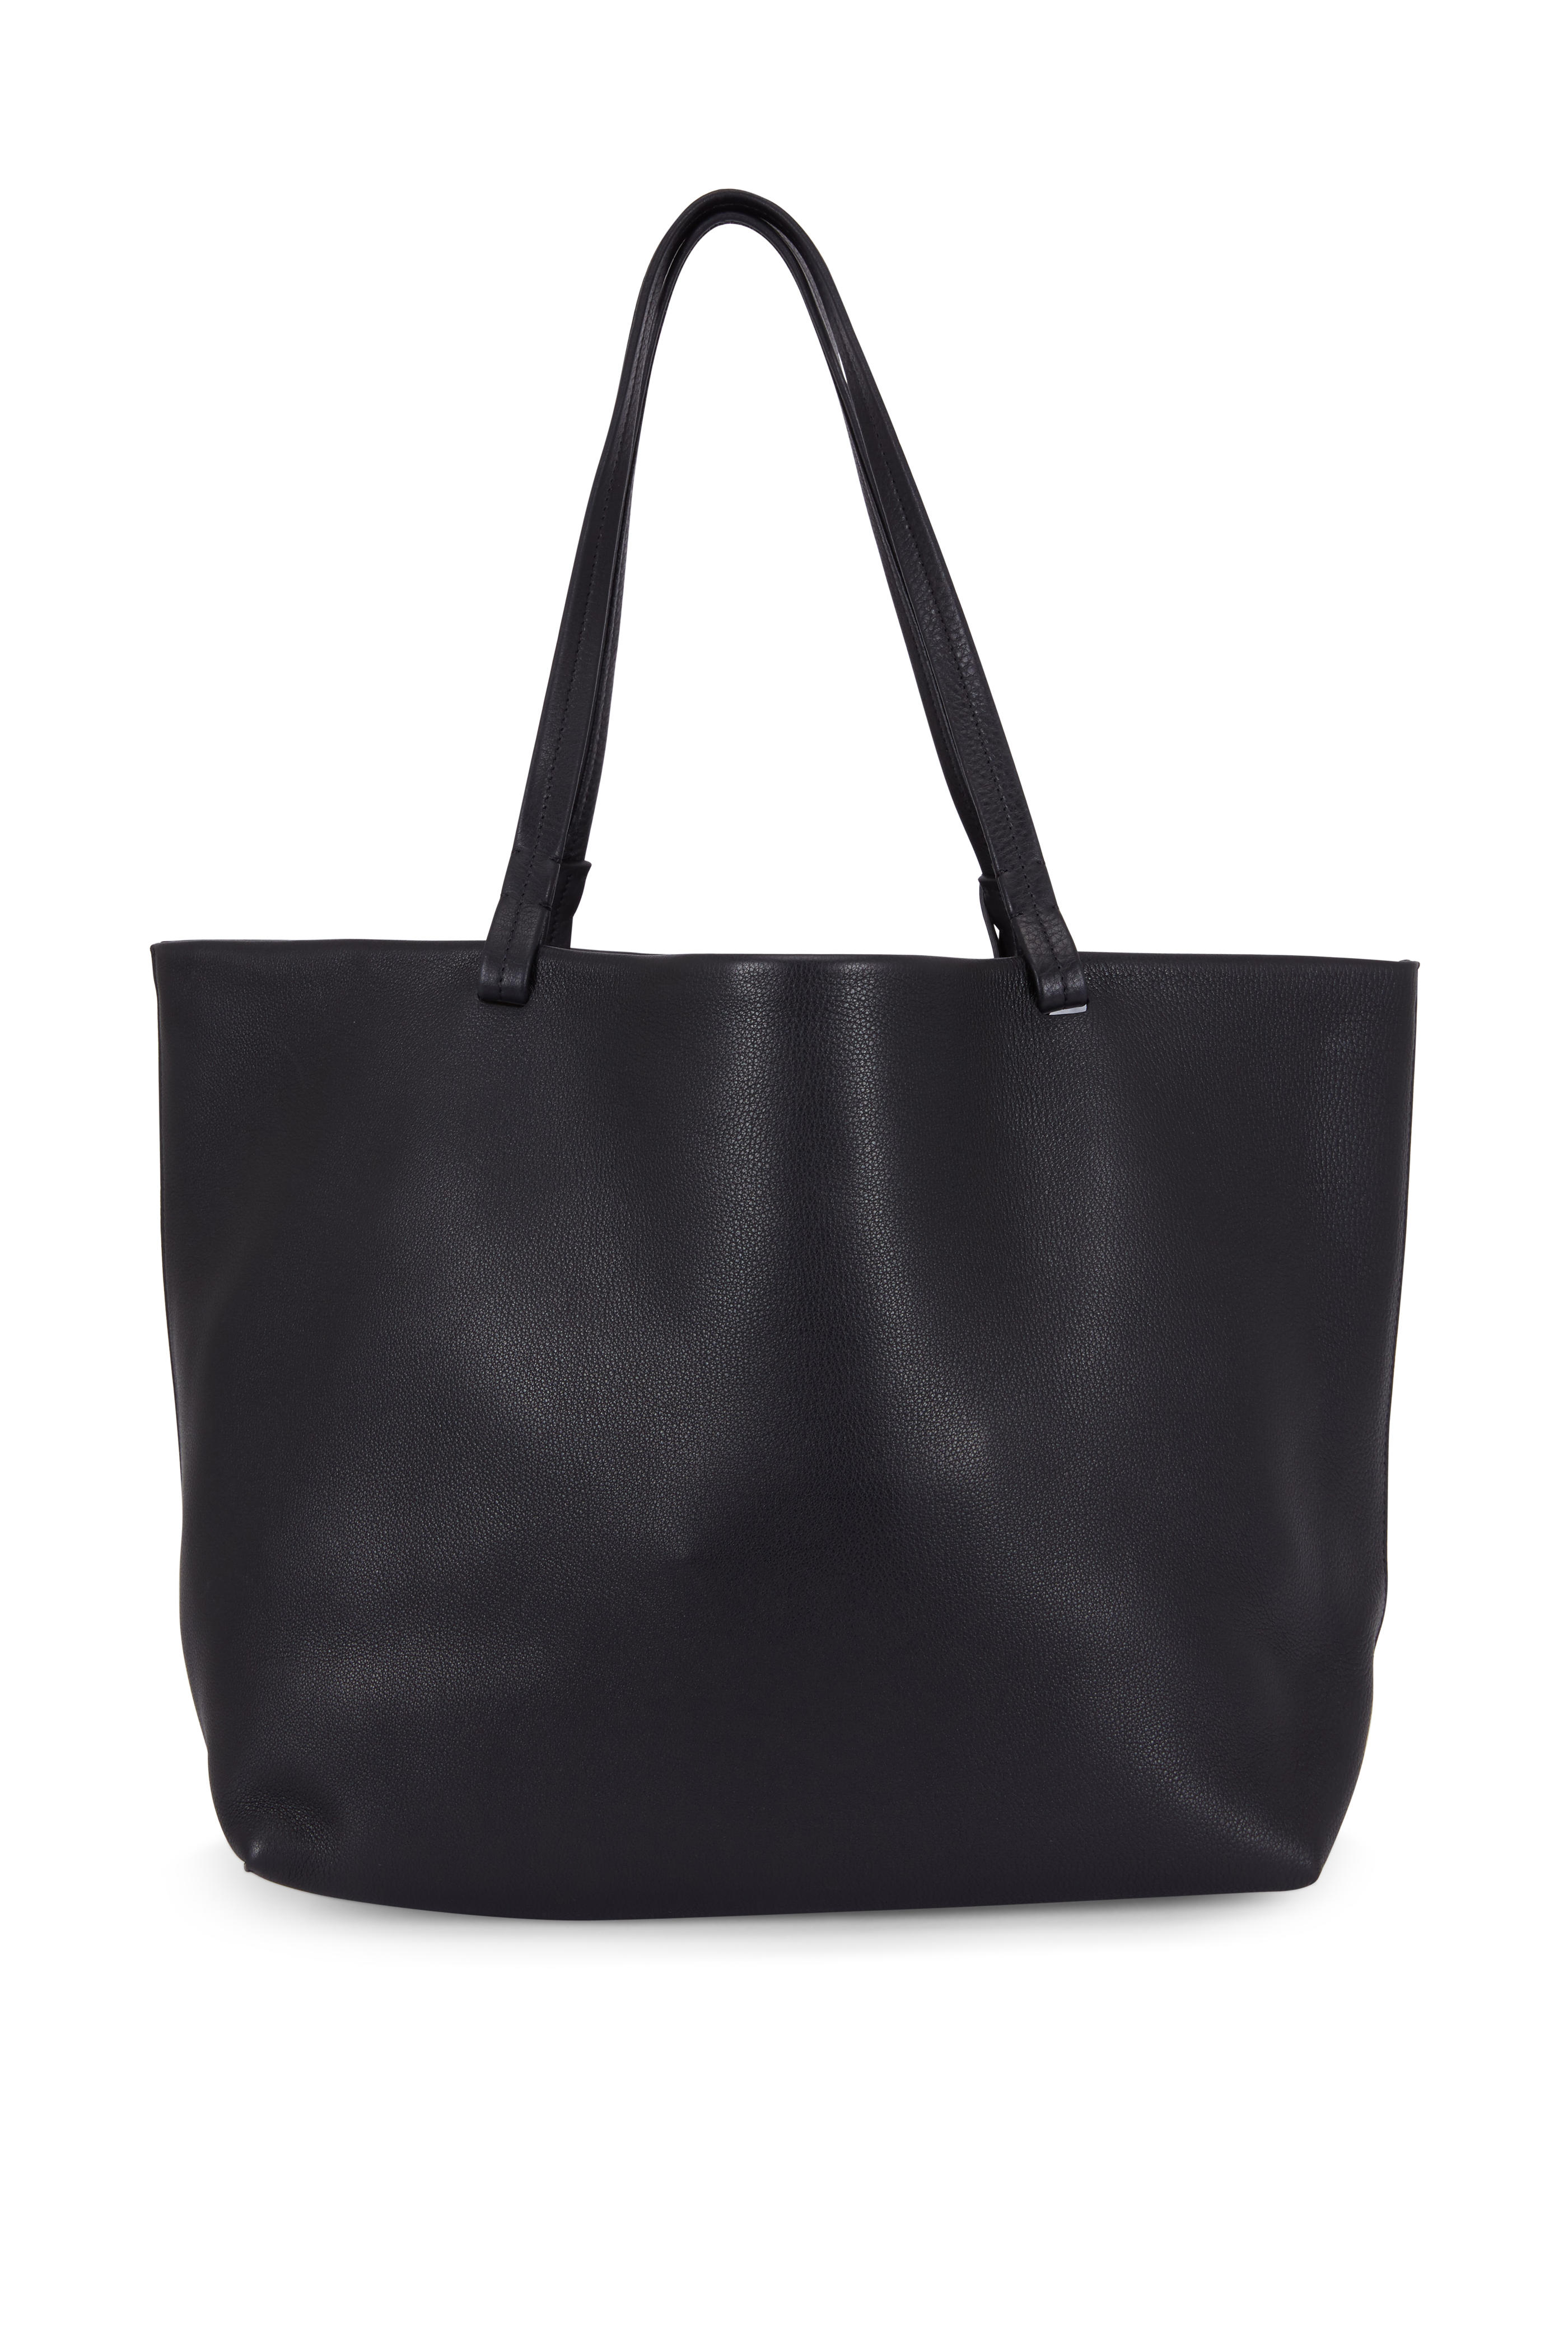 The Row - Park Black Grained Leather Tote Bag | Mitchell Stores